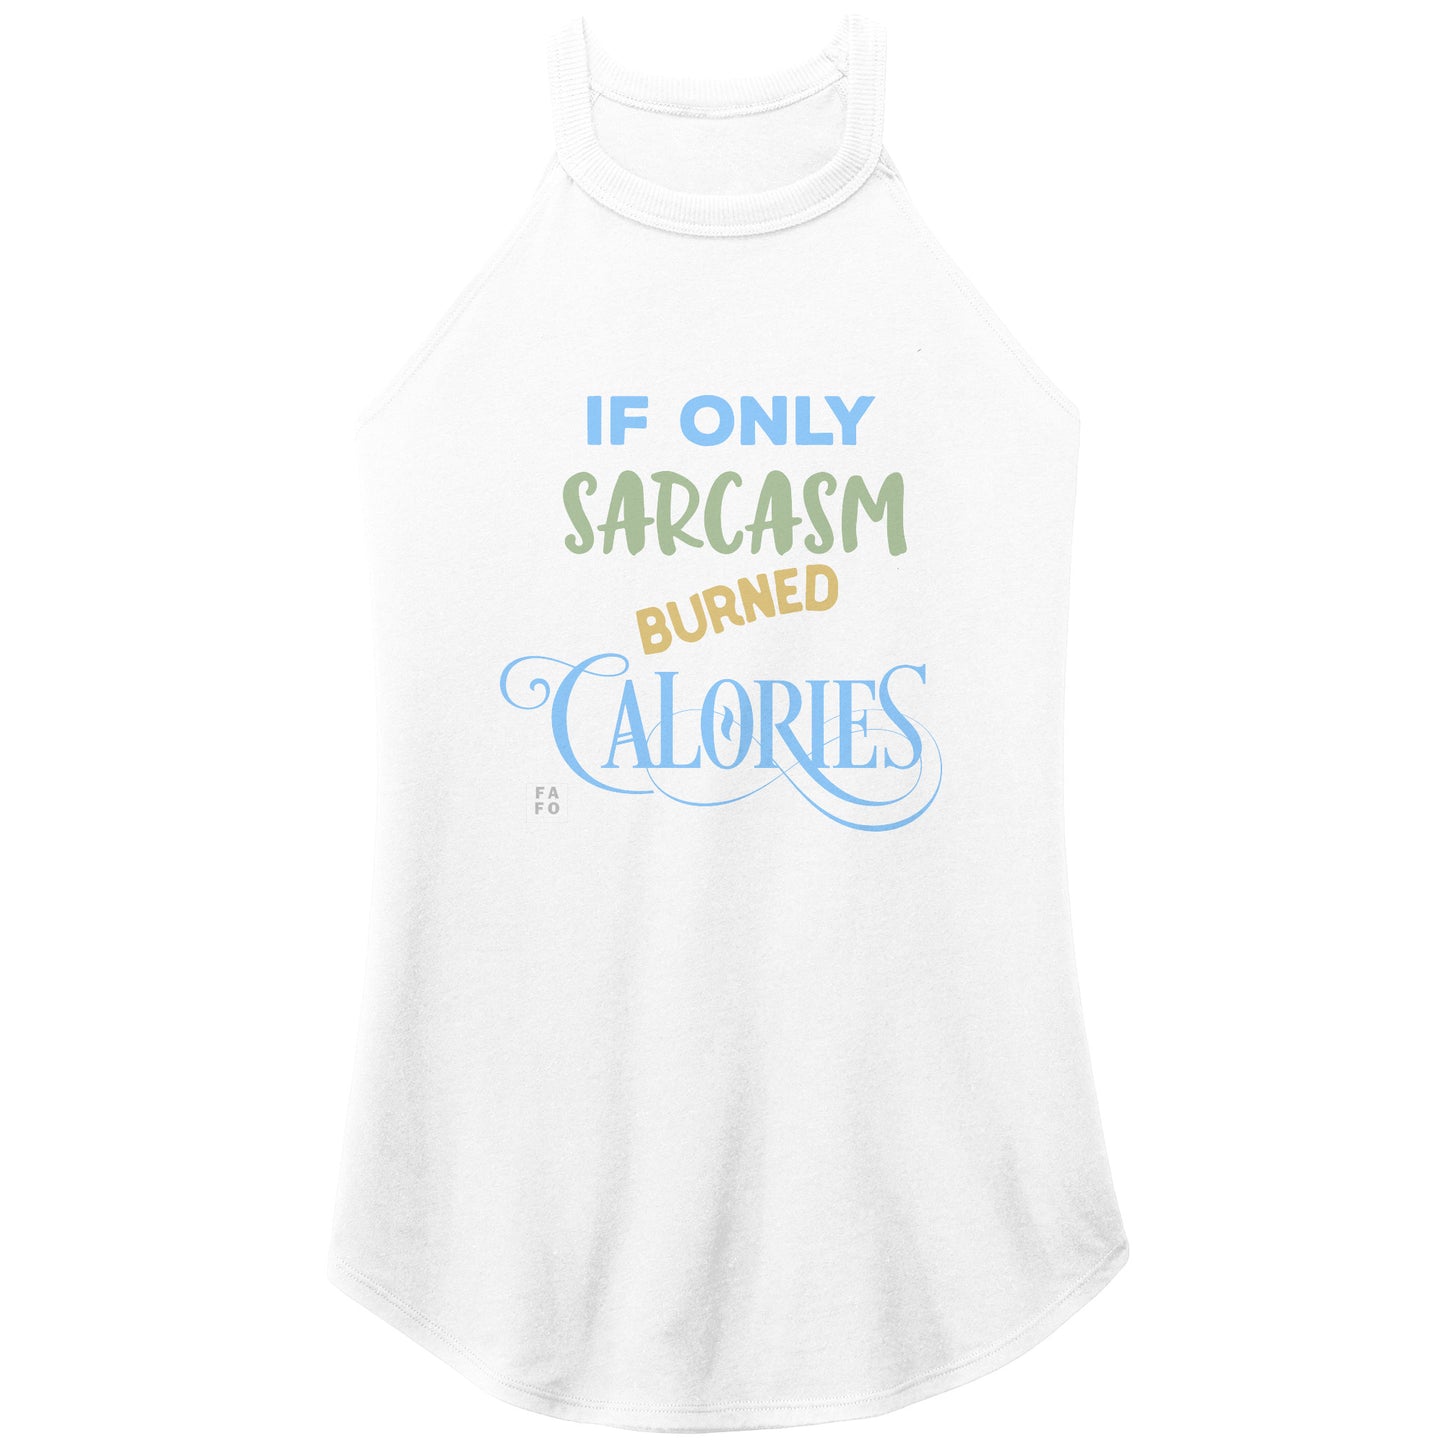 Womens Rocker Tank - If Only Sarcasm Burned Calories - White